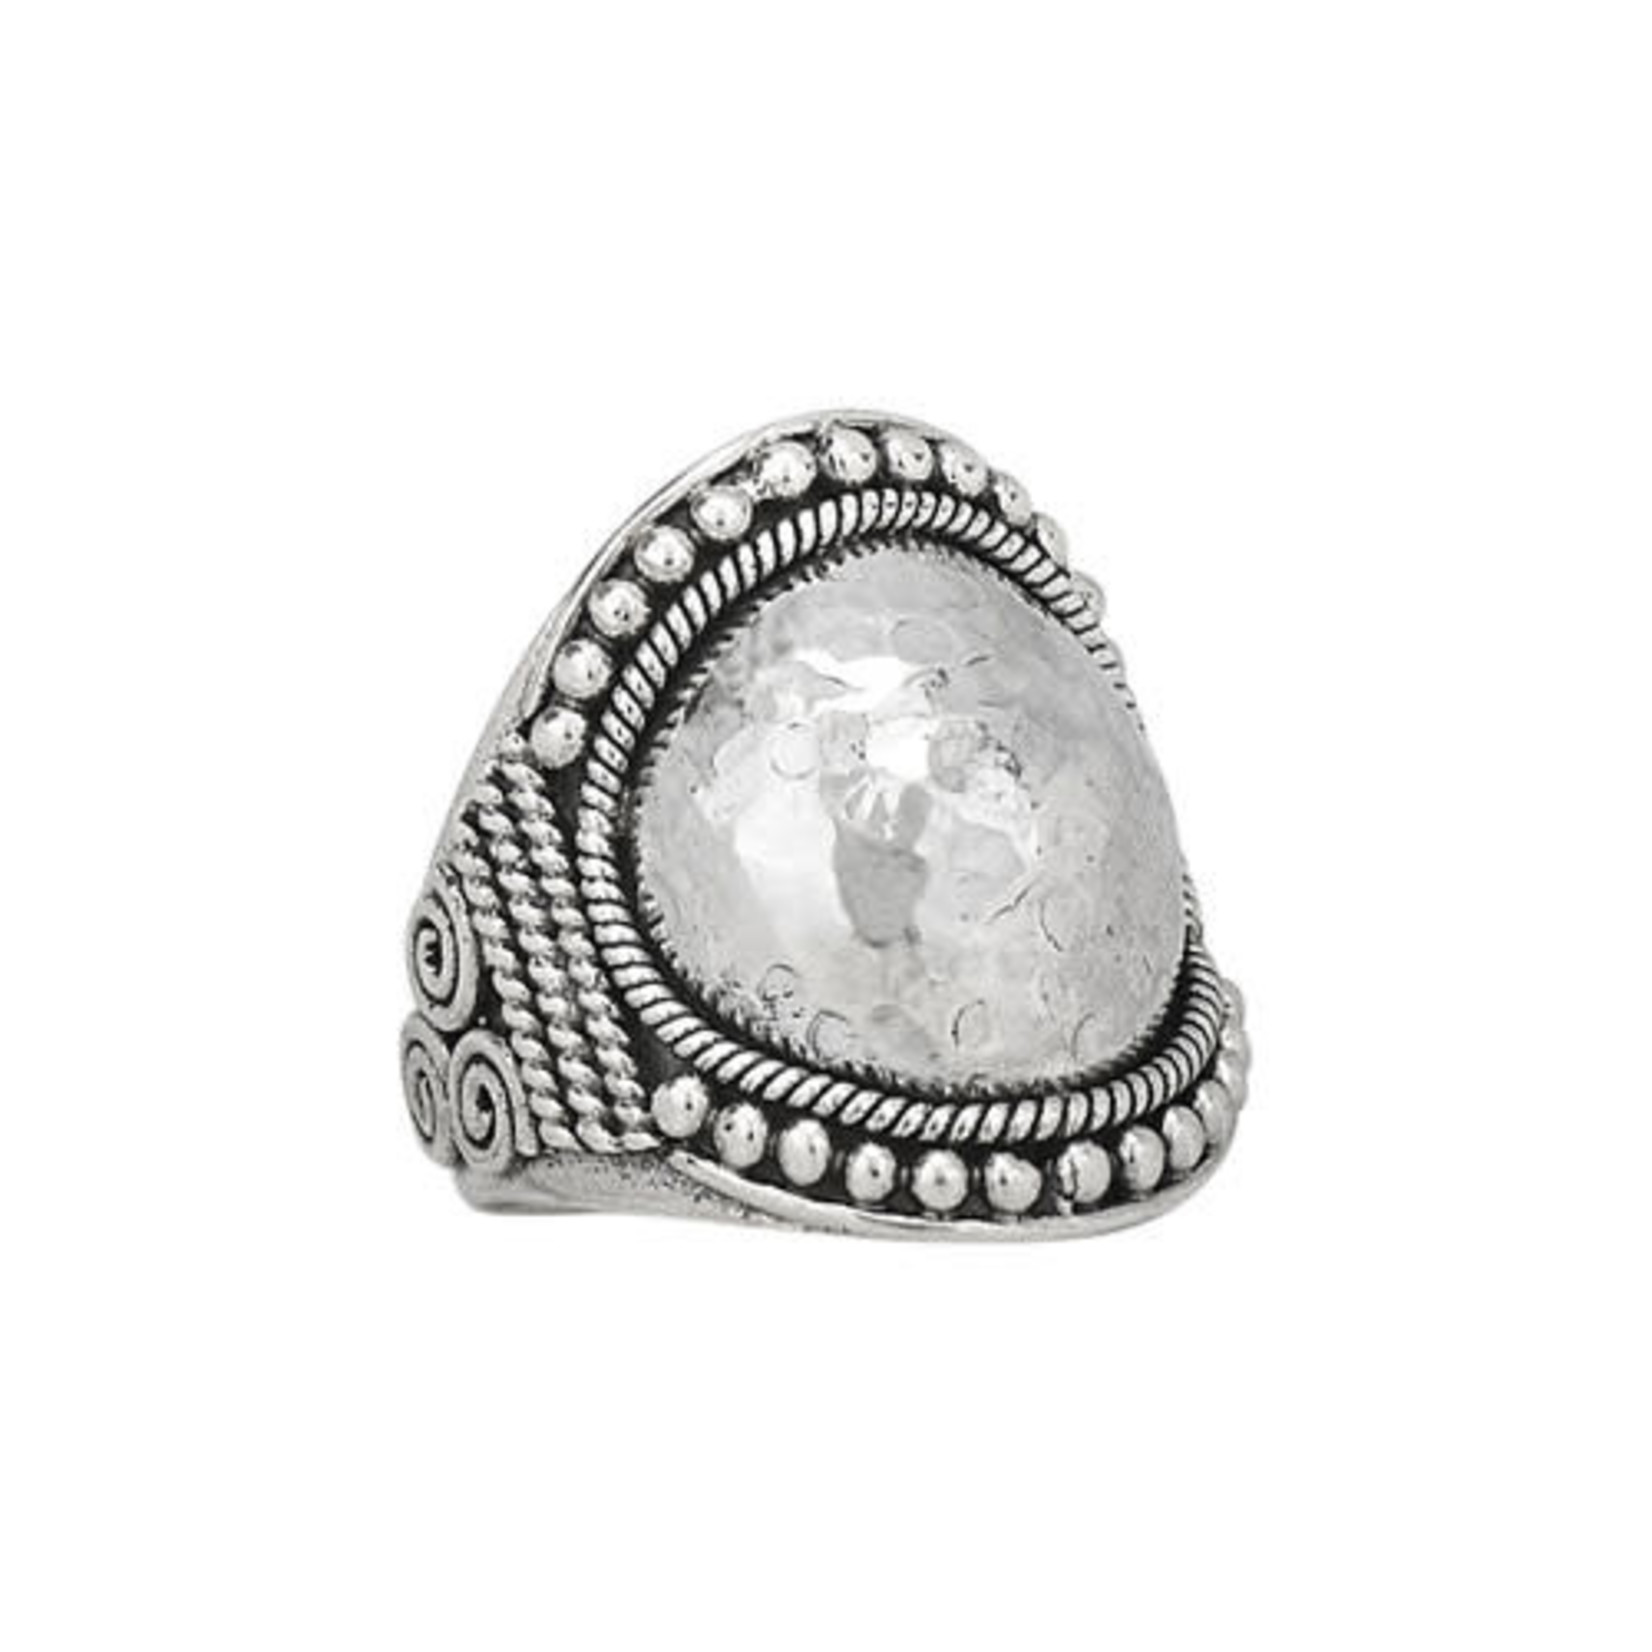 Tiger Mountain Silver Dome Ring w/ Beading